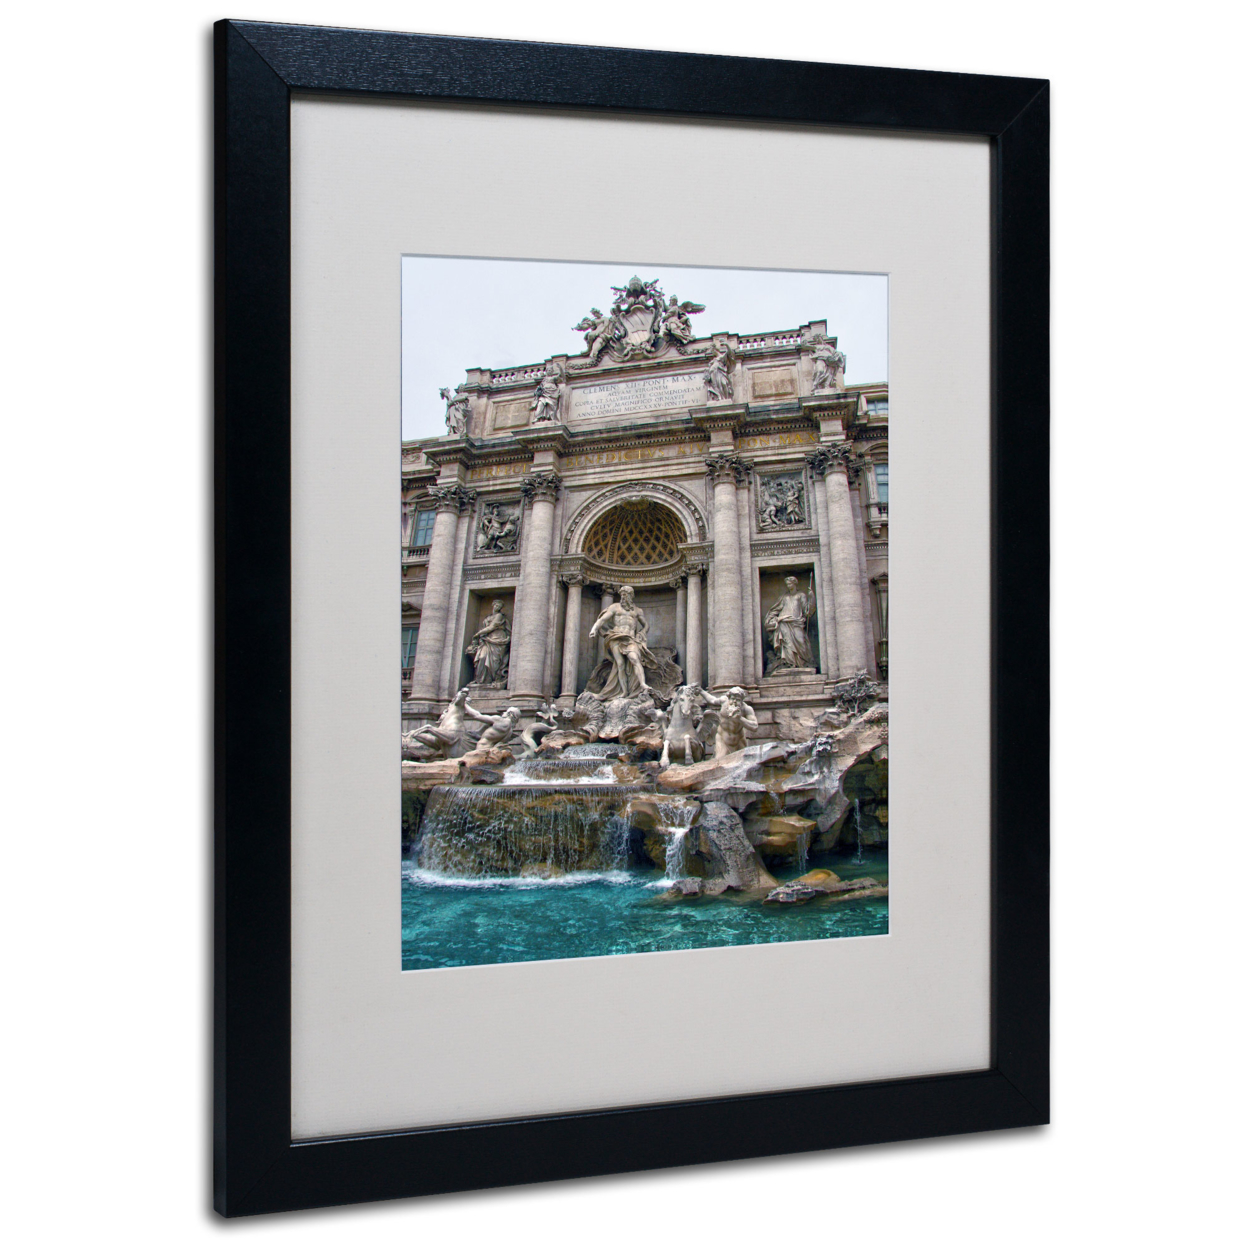 CATeyes 'Trevi Fountain' Black Wooden Framed Art 18 X 22 Inches